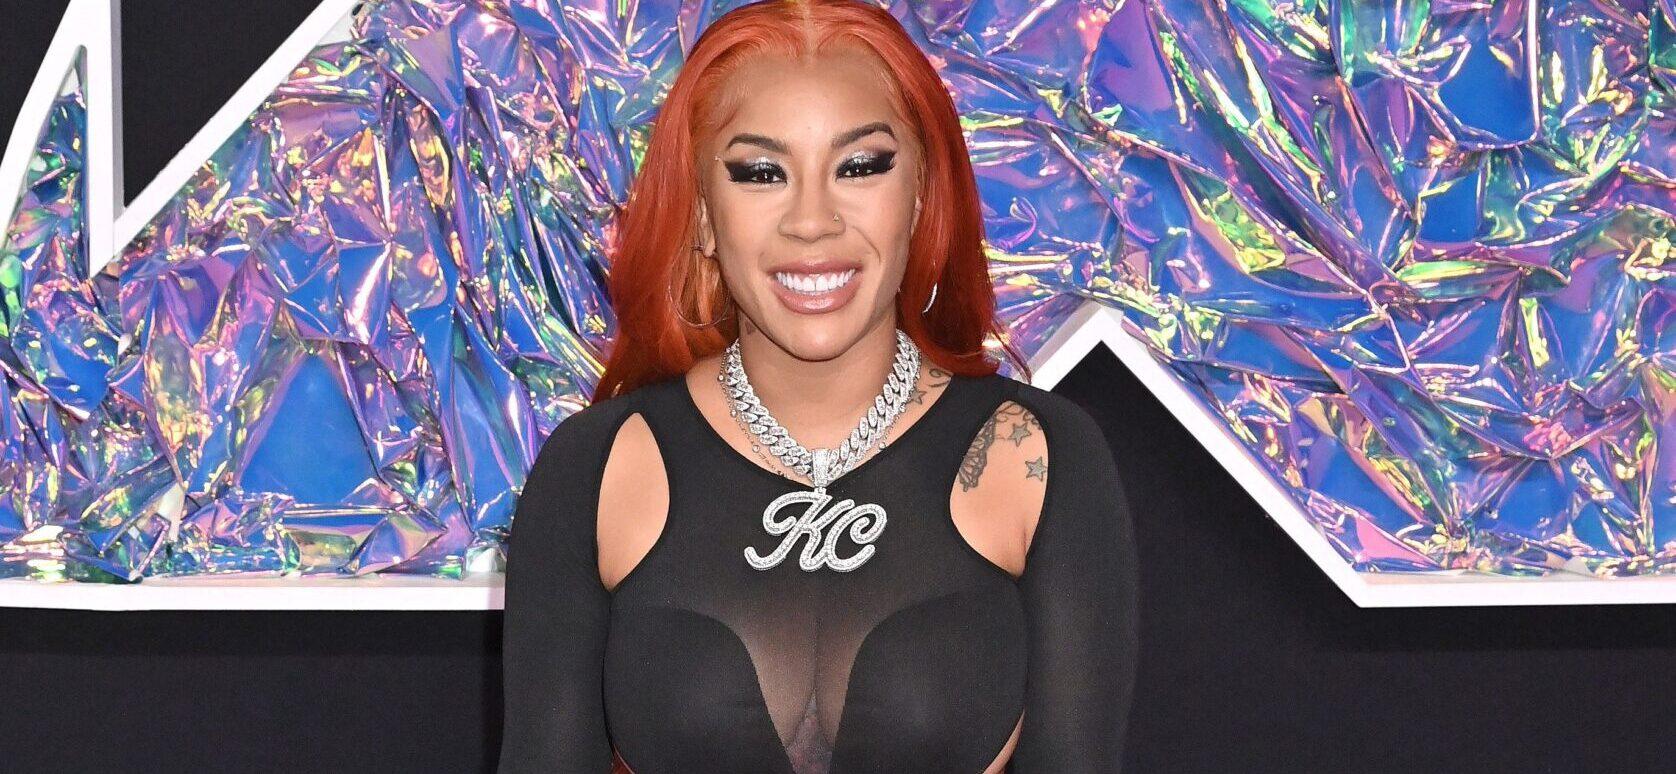 Keyshia Cole Crashes Middle School Performance Of Her Hit Song ‘Love’